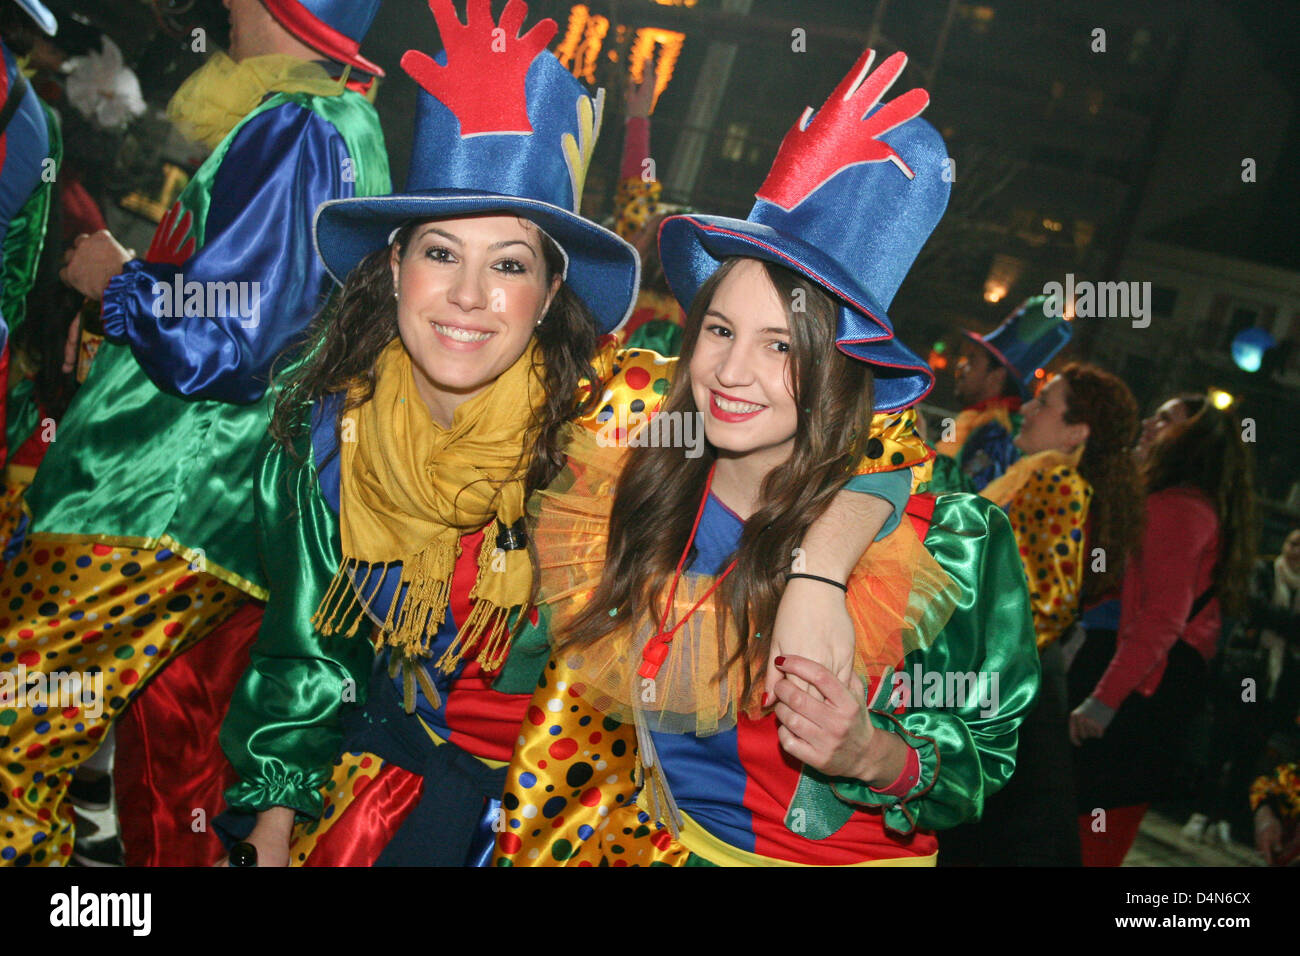 Revellers dance in colorful costumes at Patras Carnival afternoon parade in  Patras Greece, 16 March 2013. The Patras Carnival is the largest event of  its kind in Greece and one of the